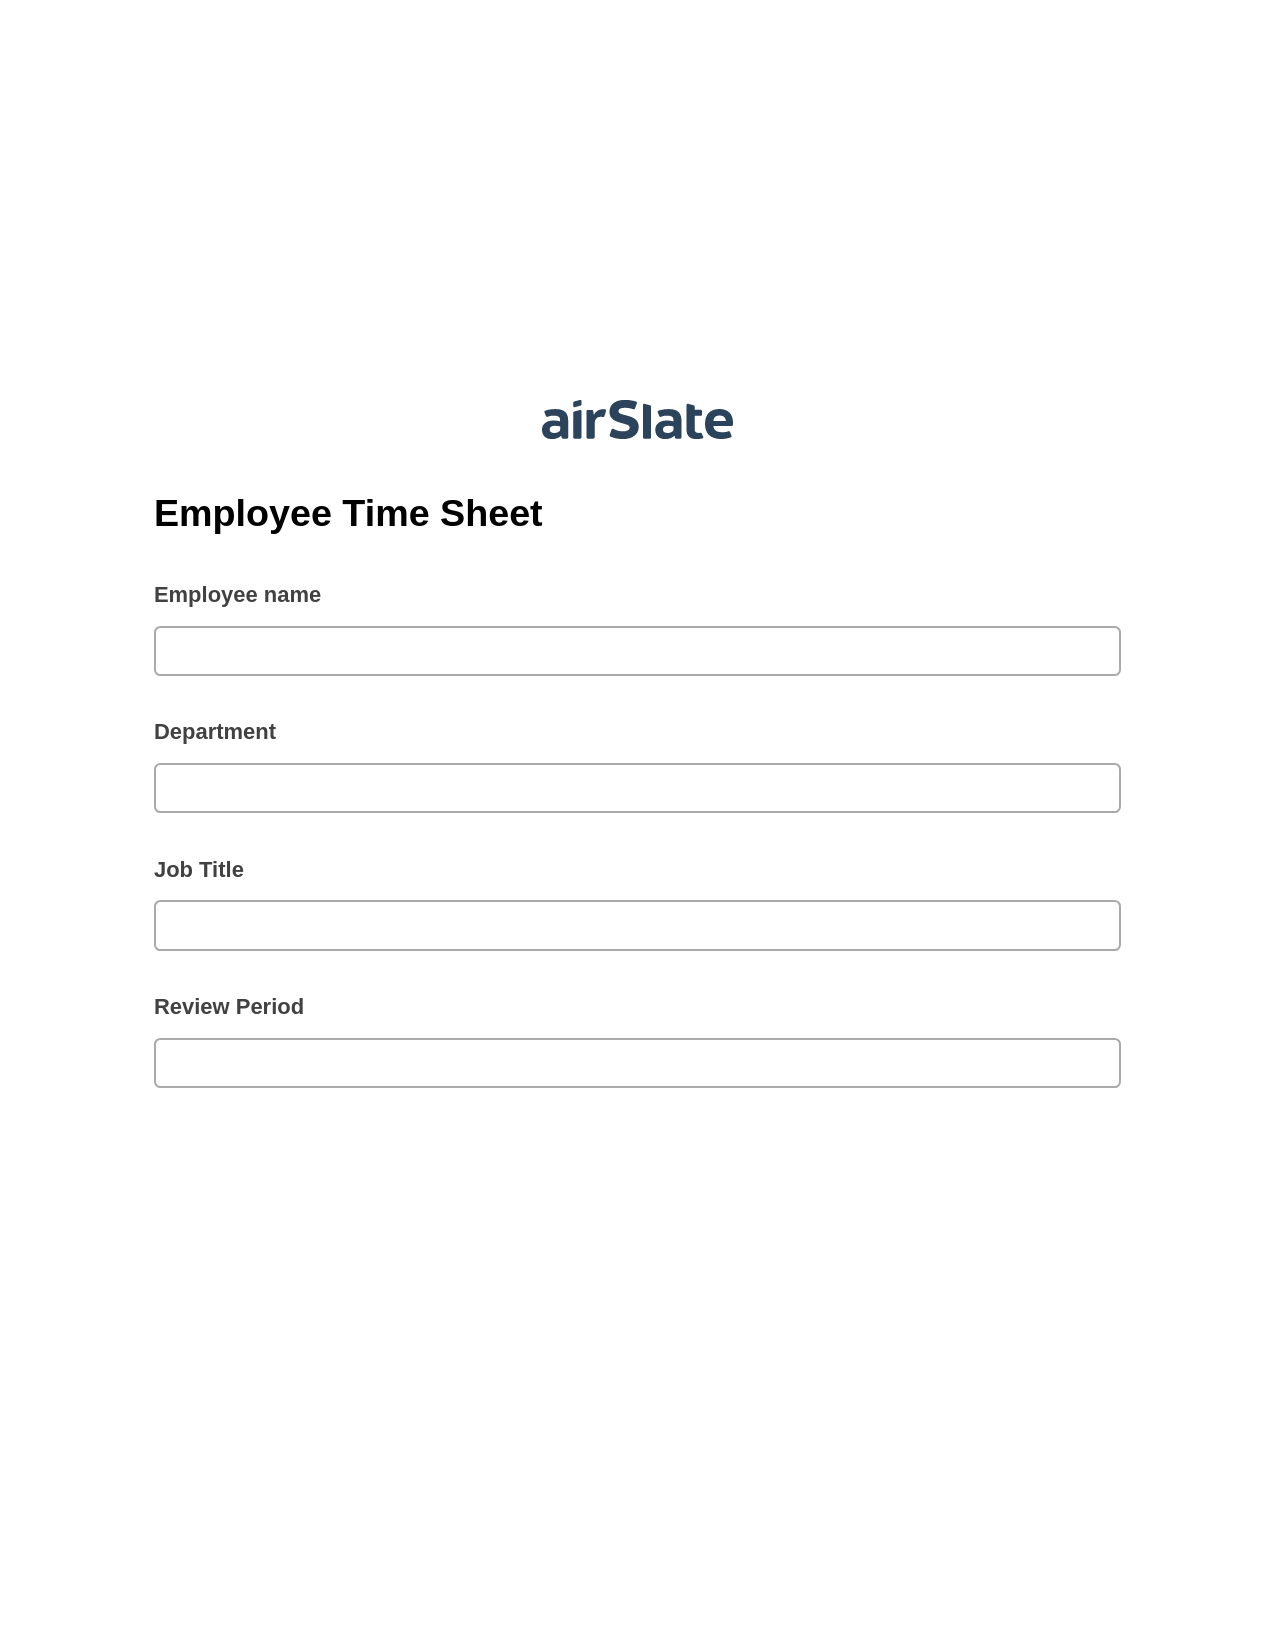 Employee Time Sheet Pre-fill from Salesforce Records Bot, Update Audit Trail Bot, Export to MySQL Bot